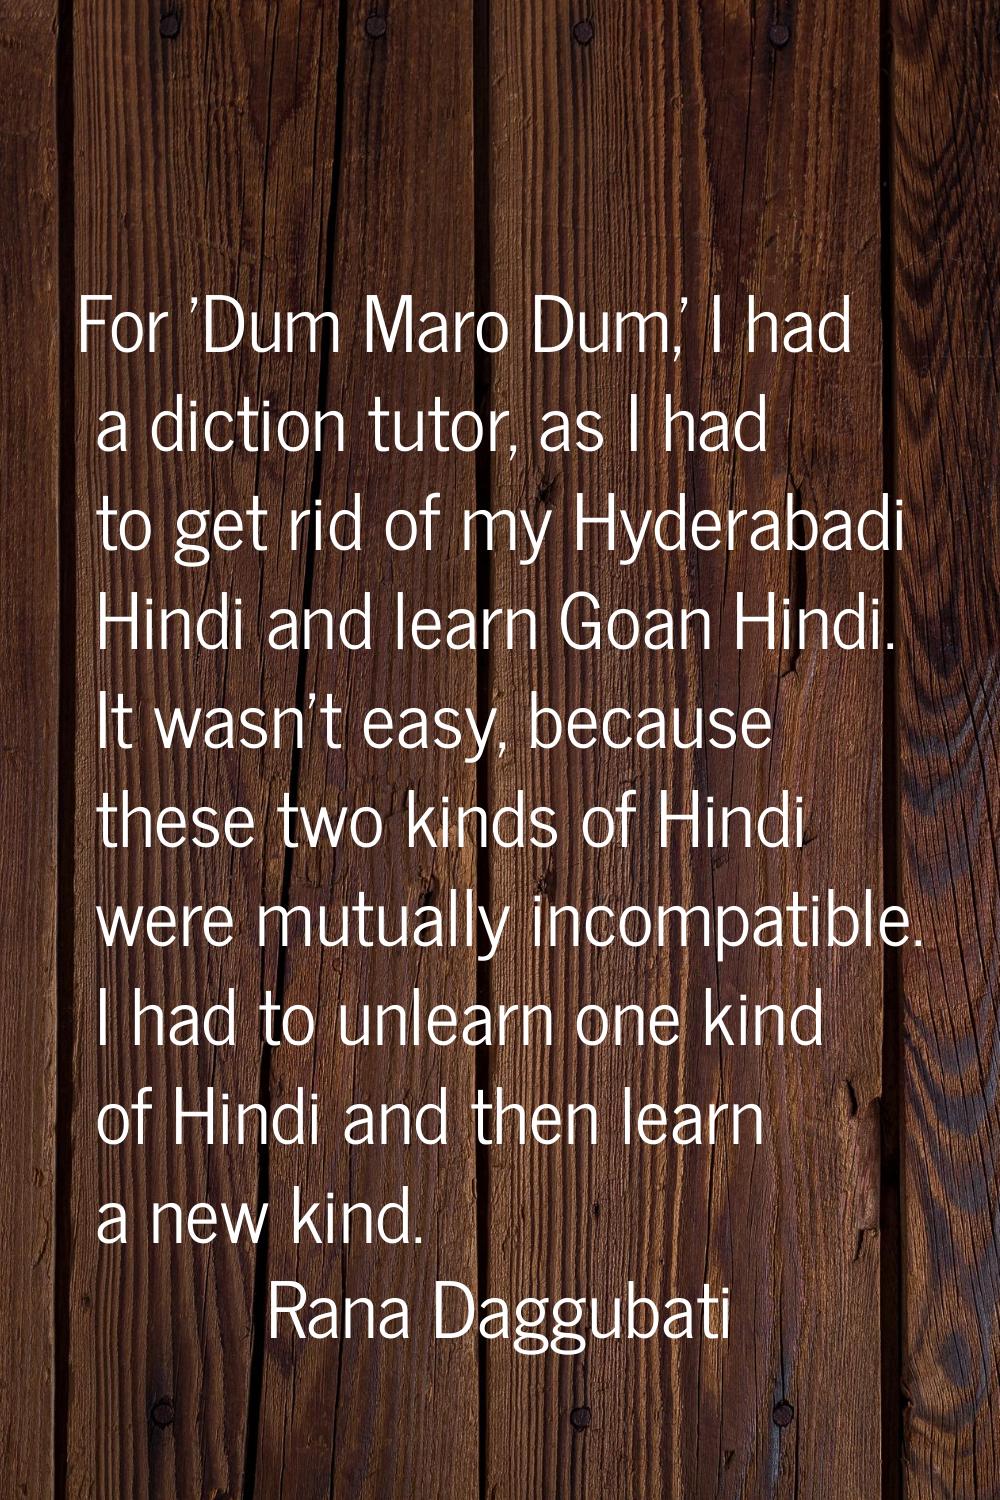 For 'Dum Maro Dum,' I had a diction tutor, as I had to get rid of my Hyderabadi Hindi and learn Goa